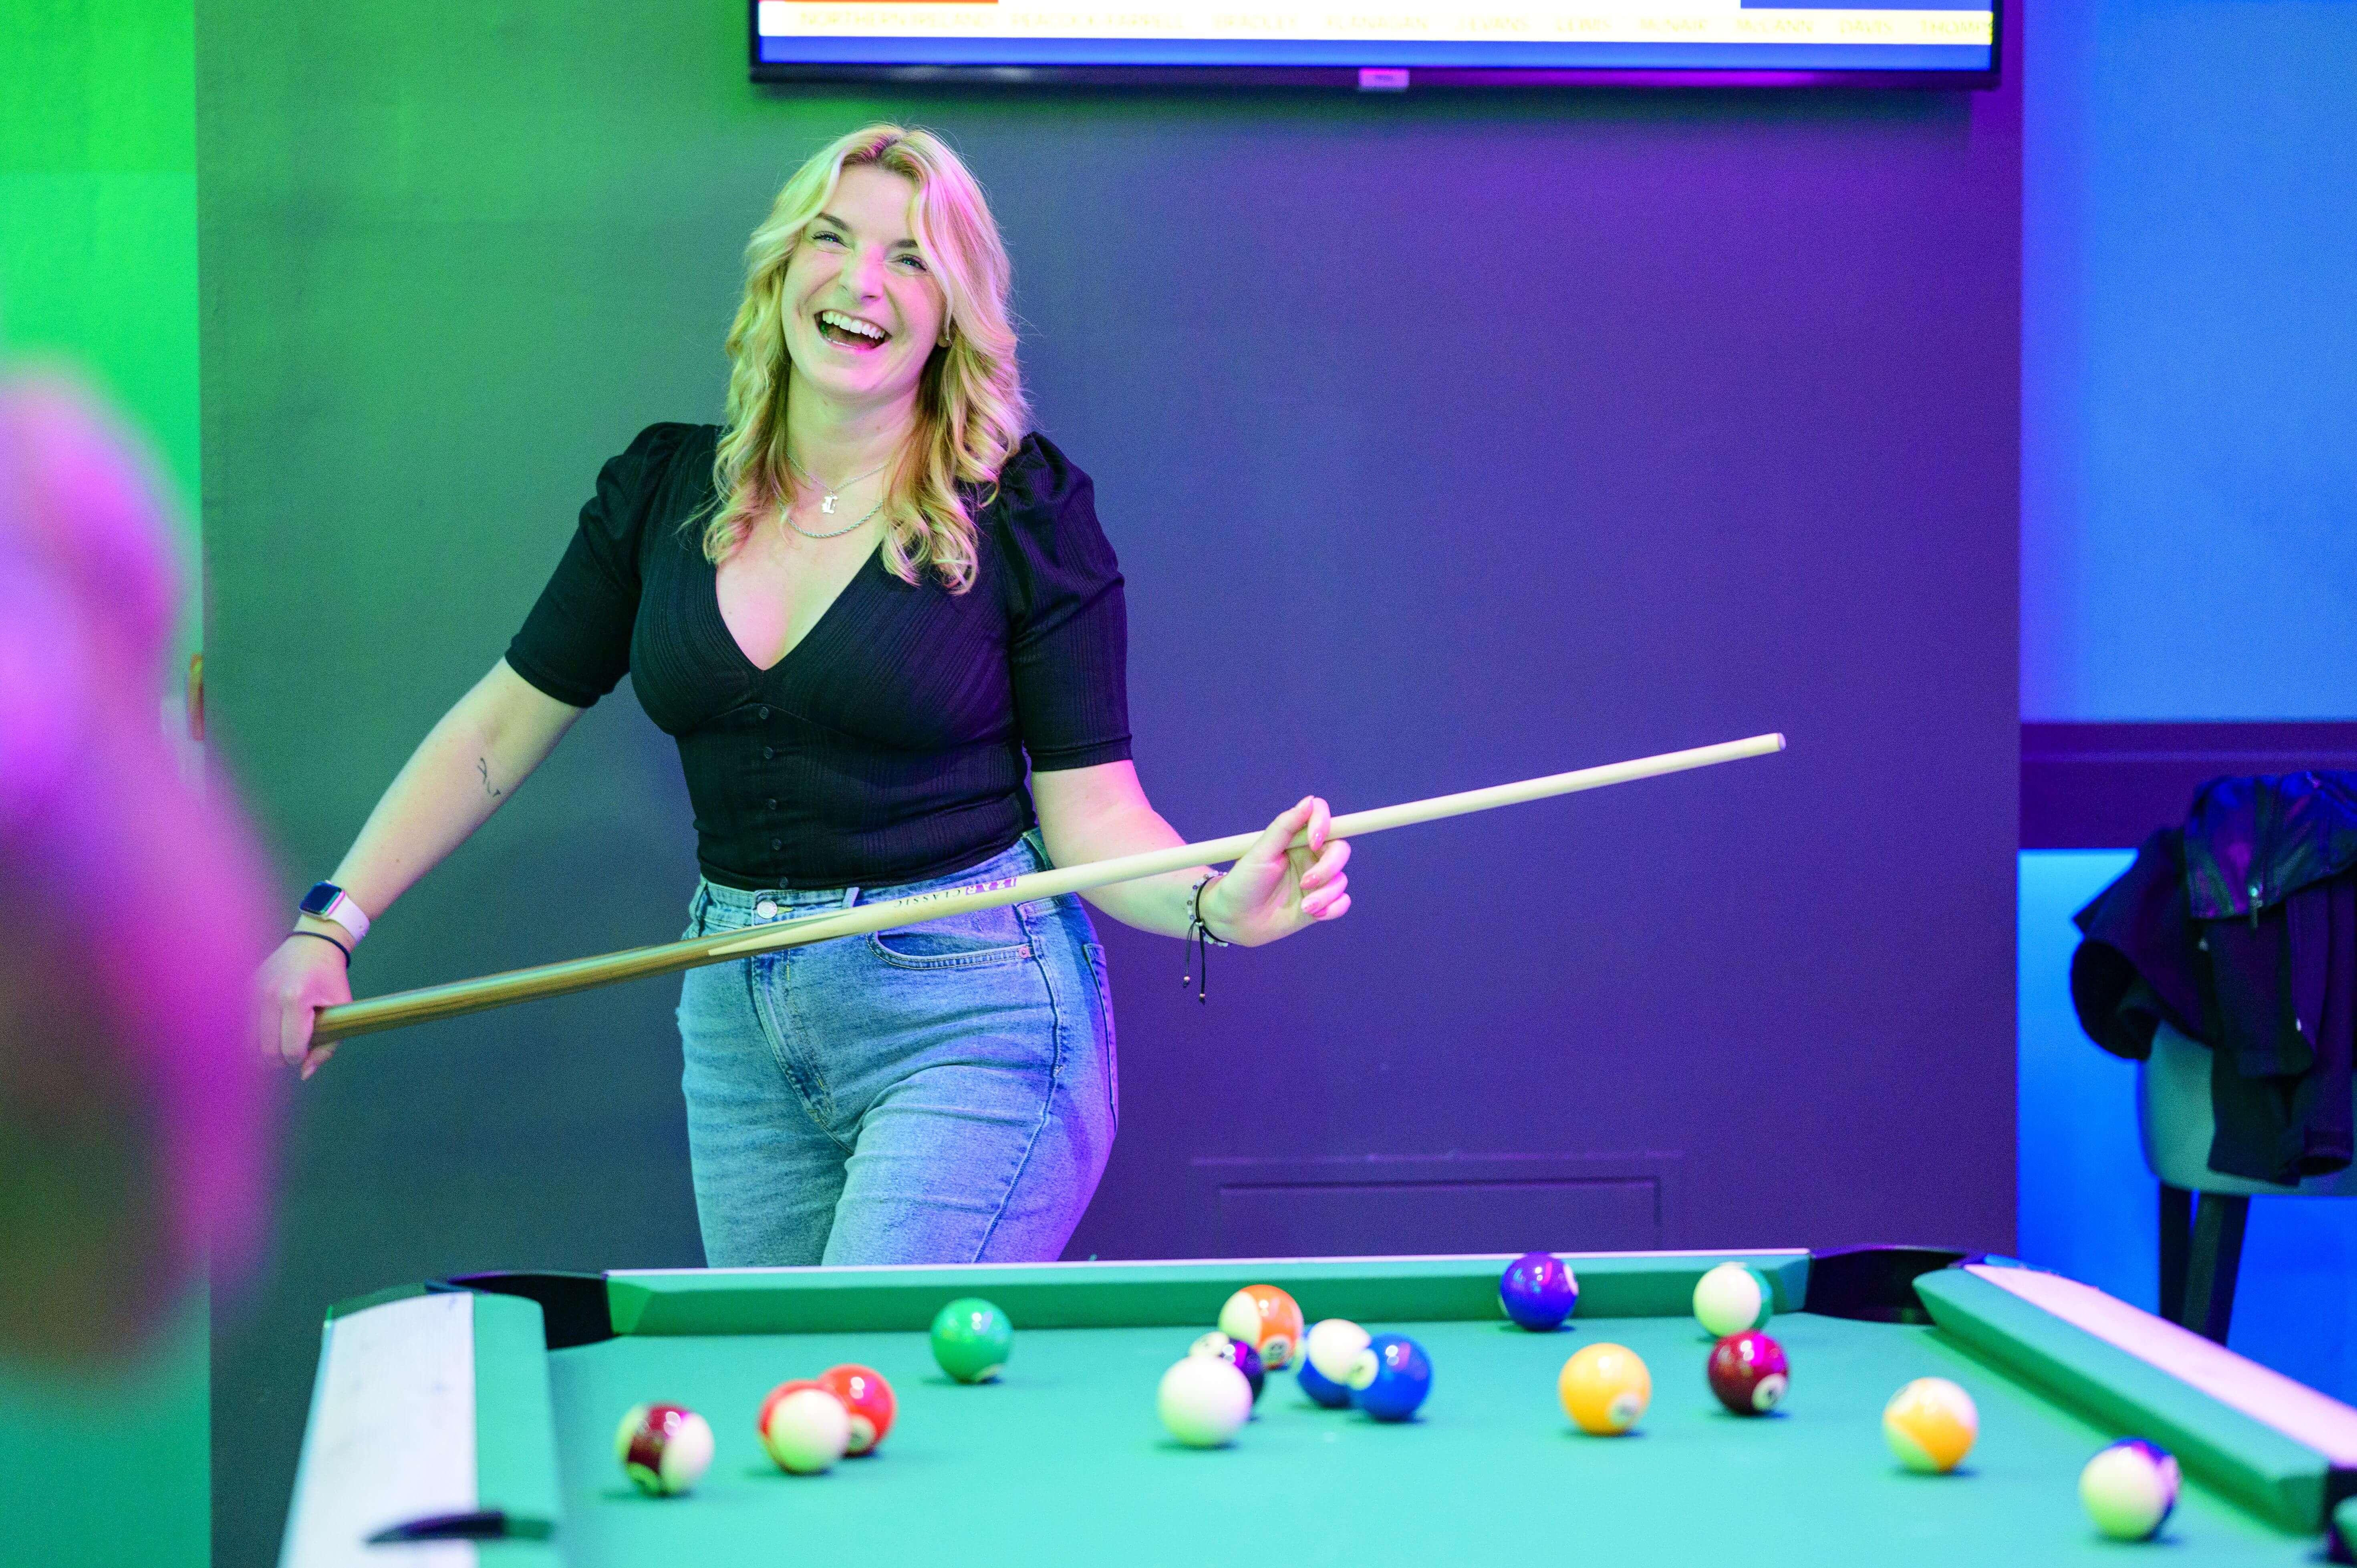 Young Woman Holding Cue In Front Of Pool Table